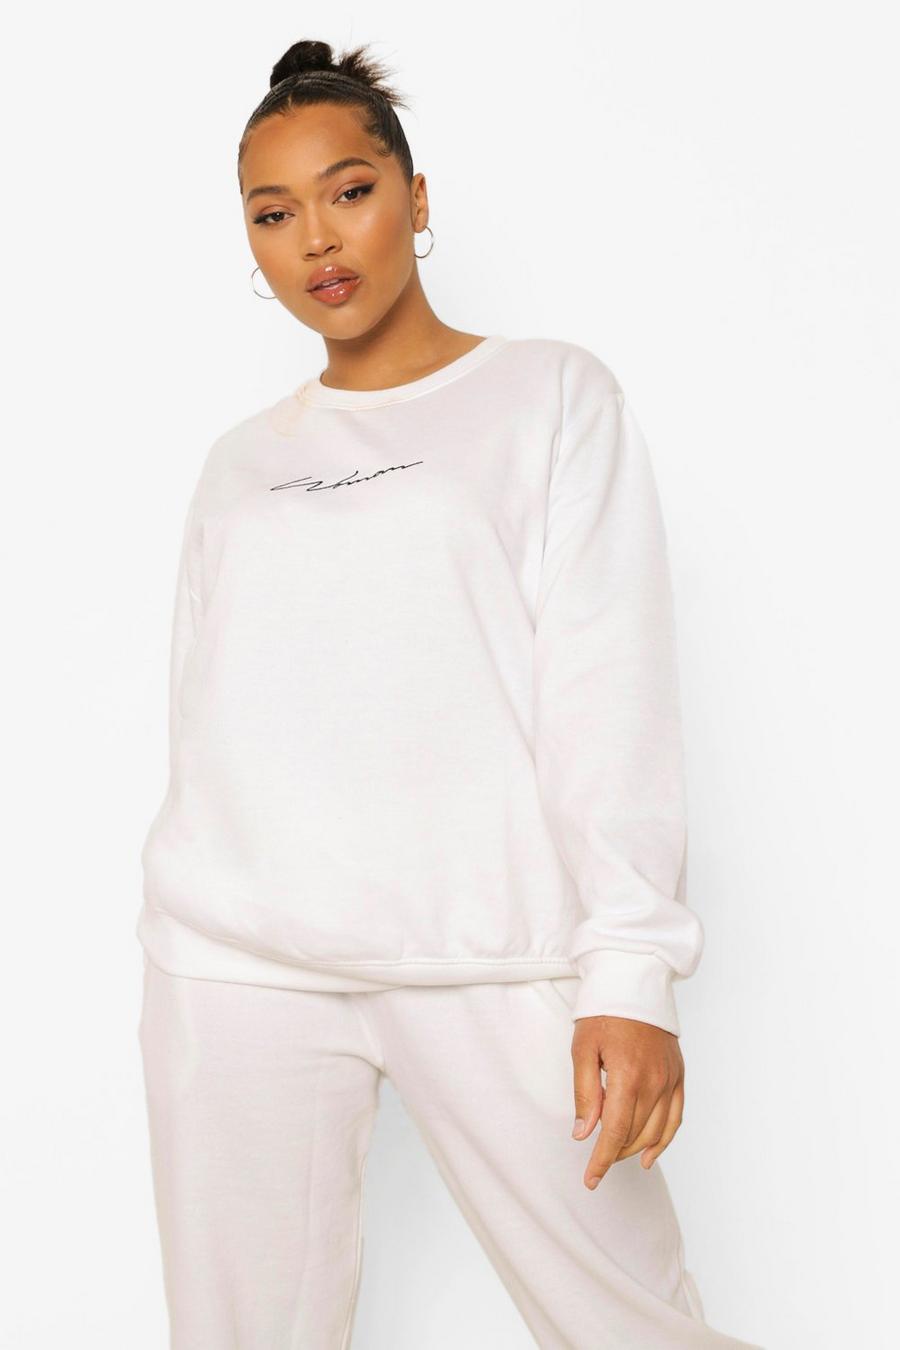 Grande taille - Sweat Woman Crew, White image number 1